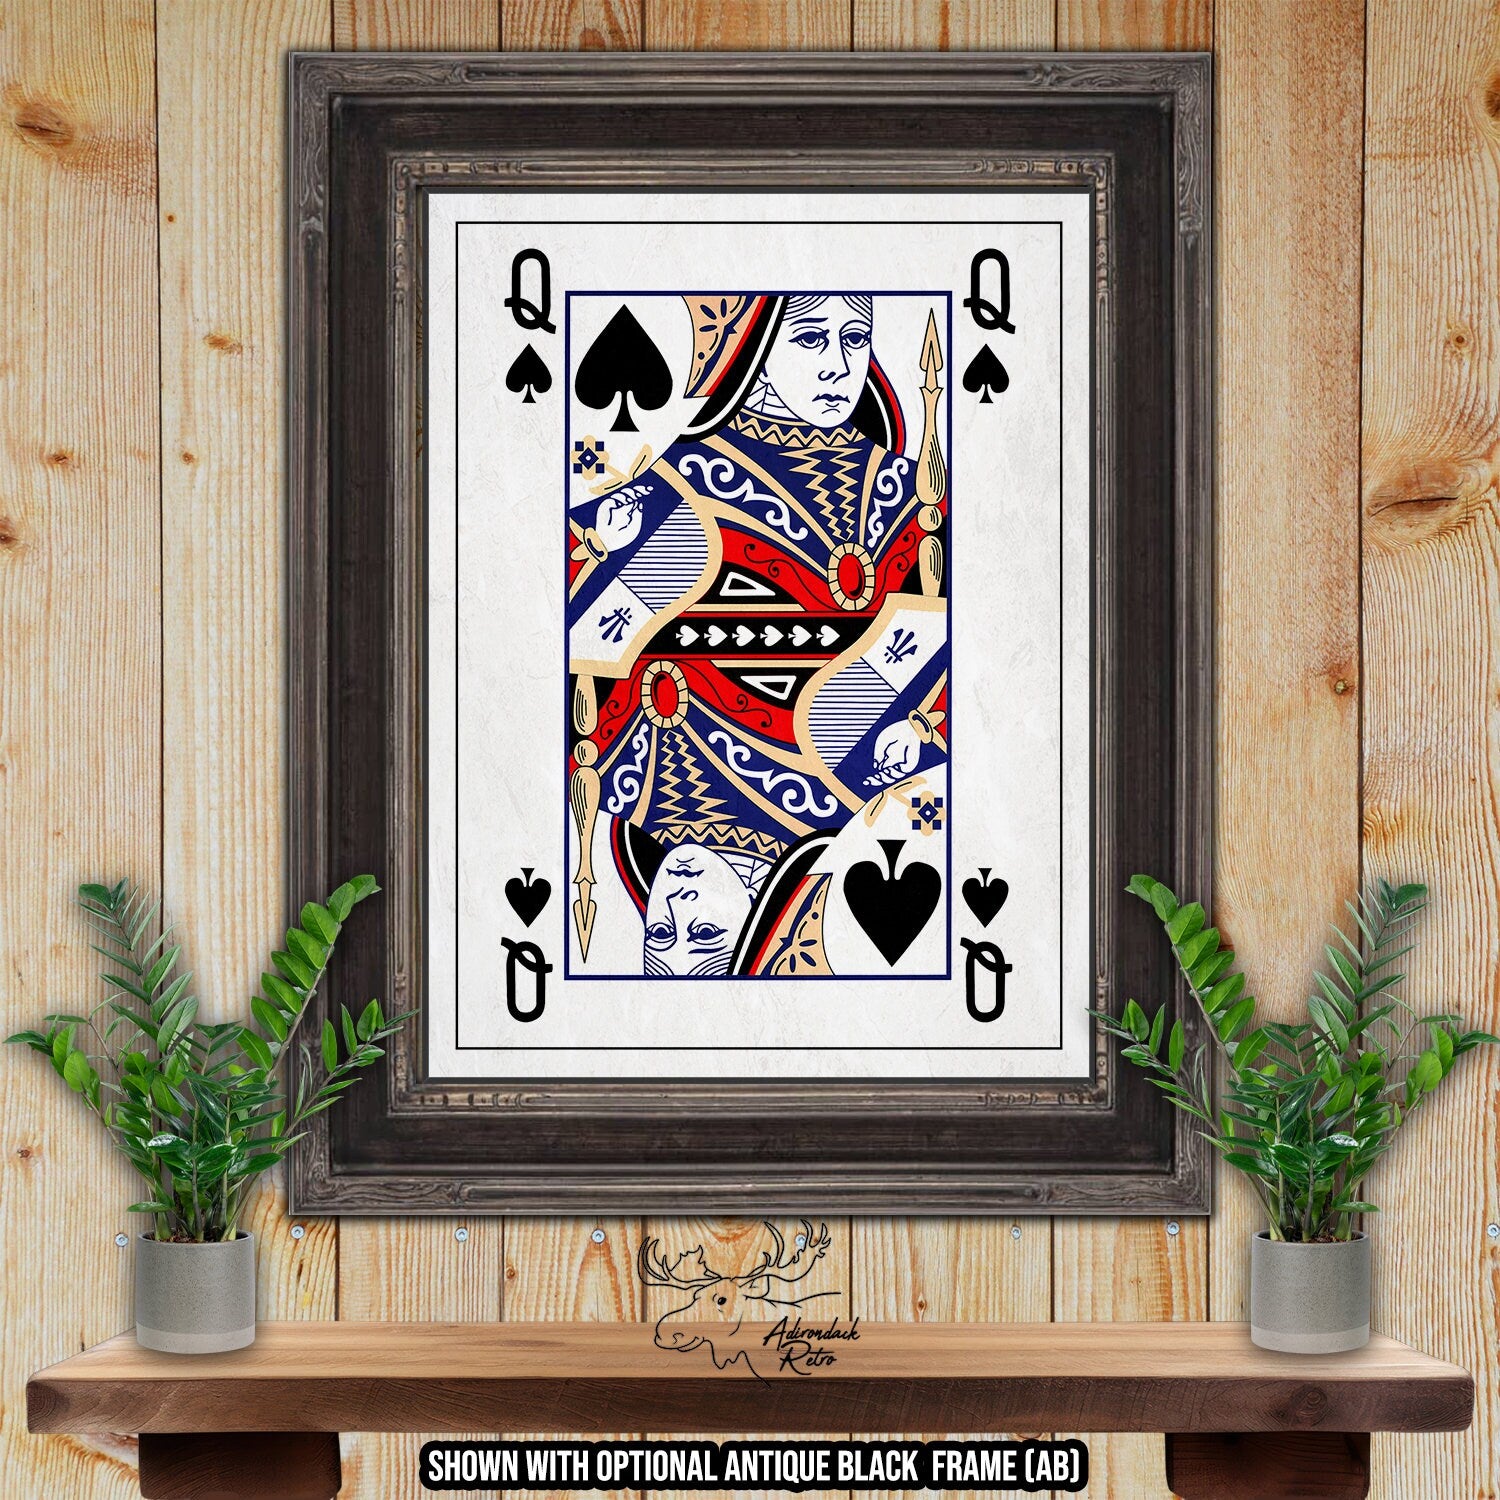 Queen of Spades Fine Art Poker Print - Playing Card Poster at Adirondack Retro